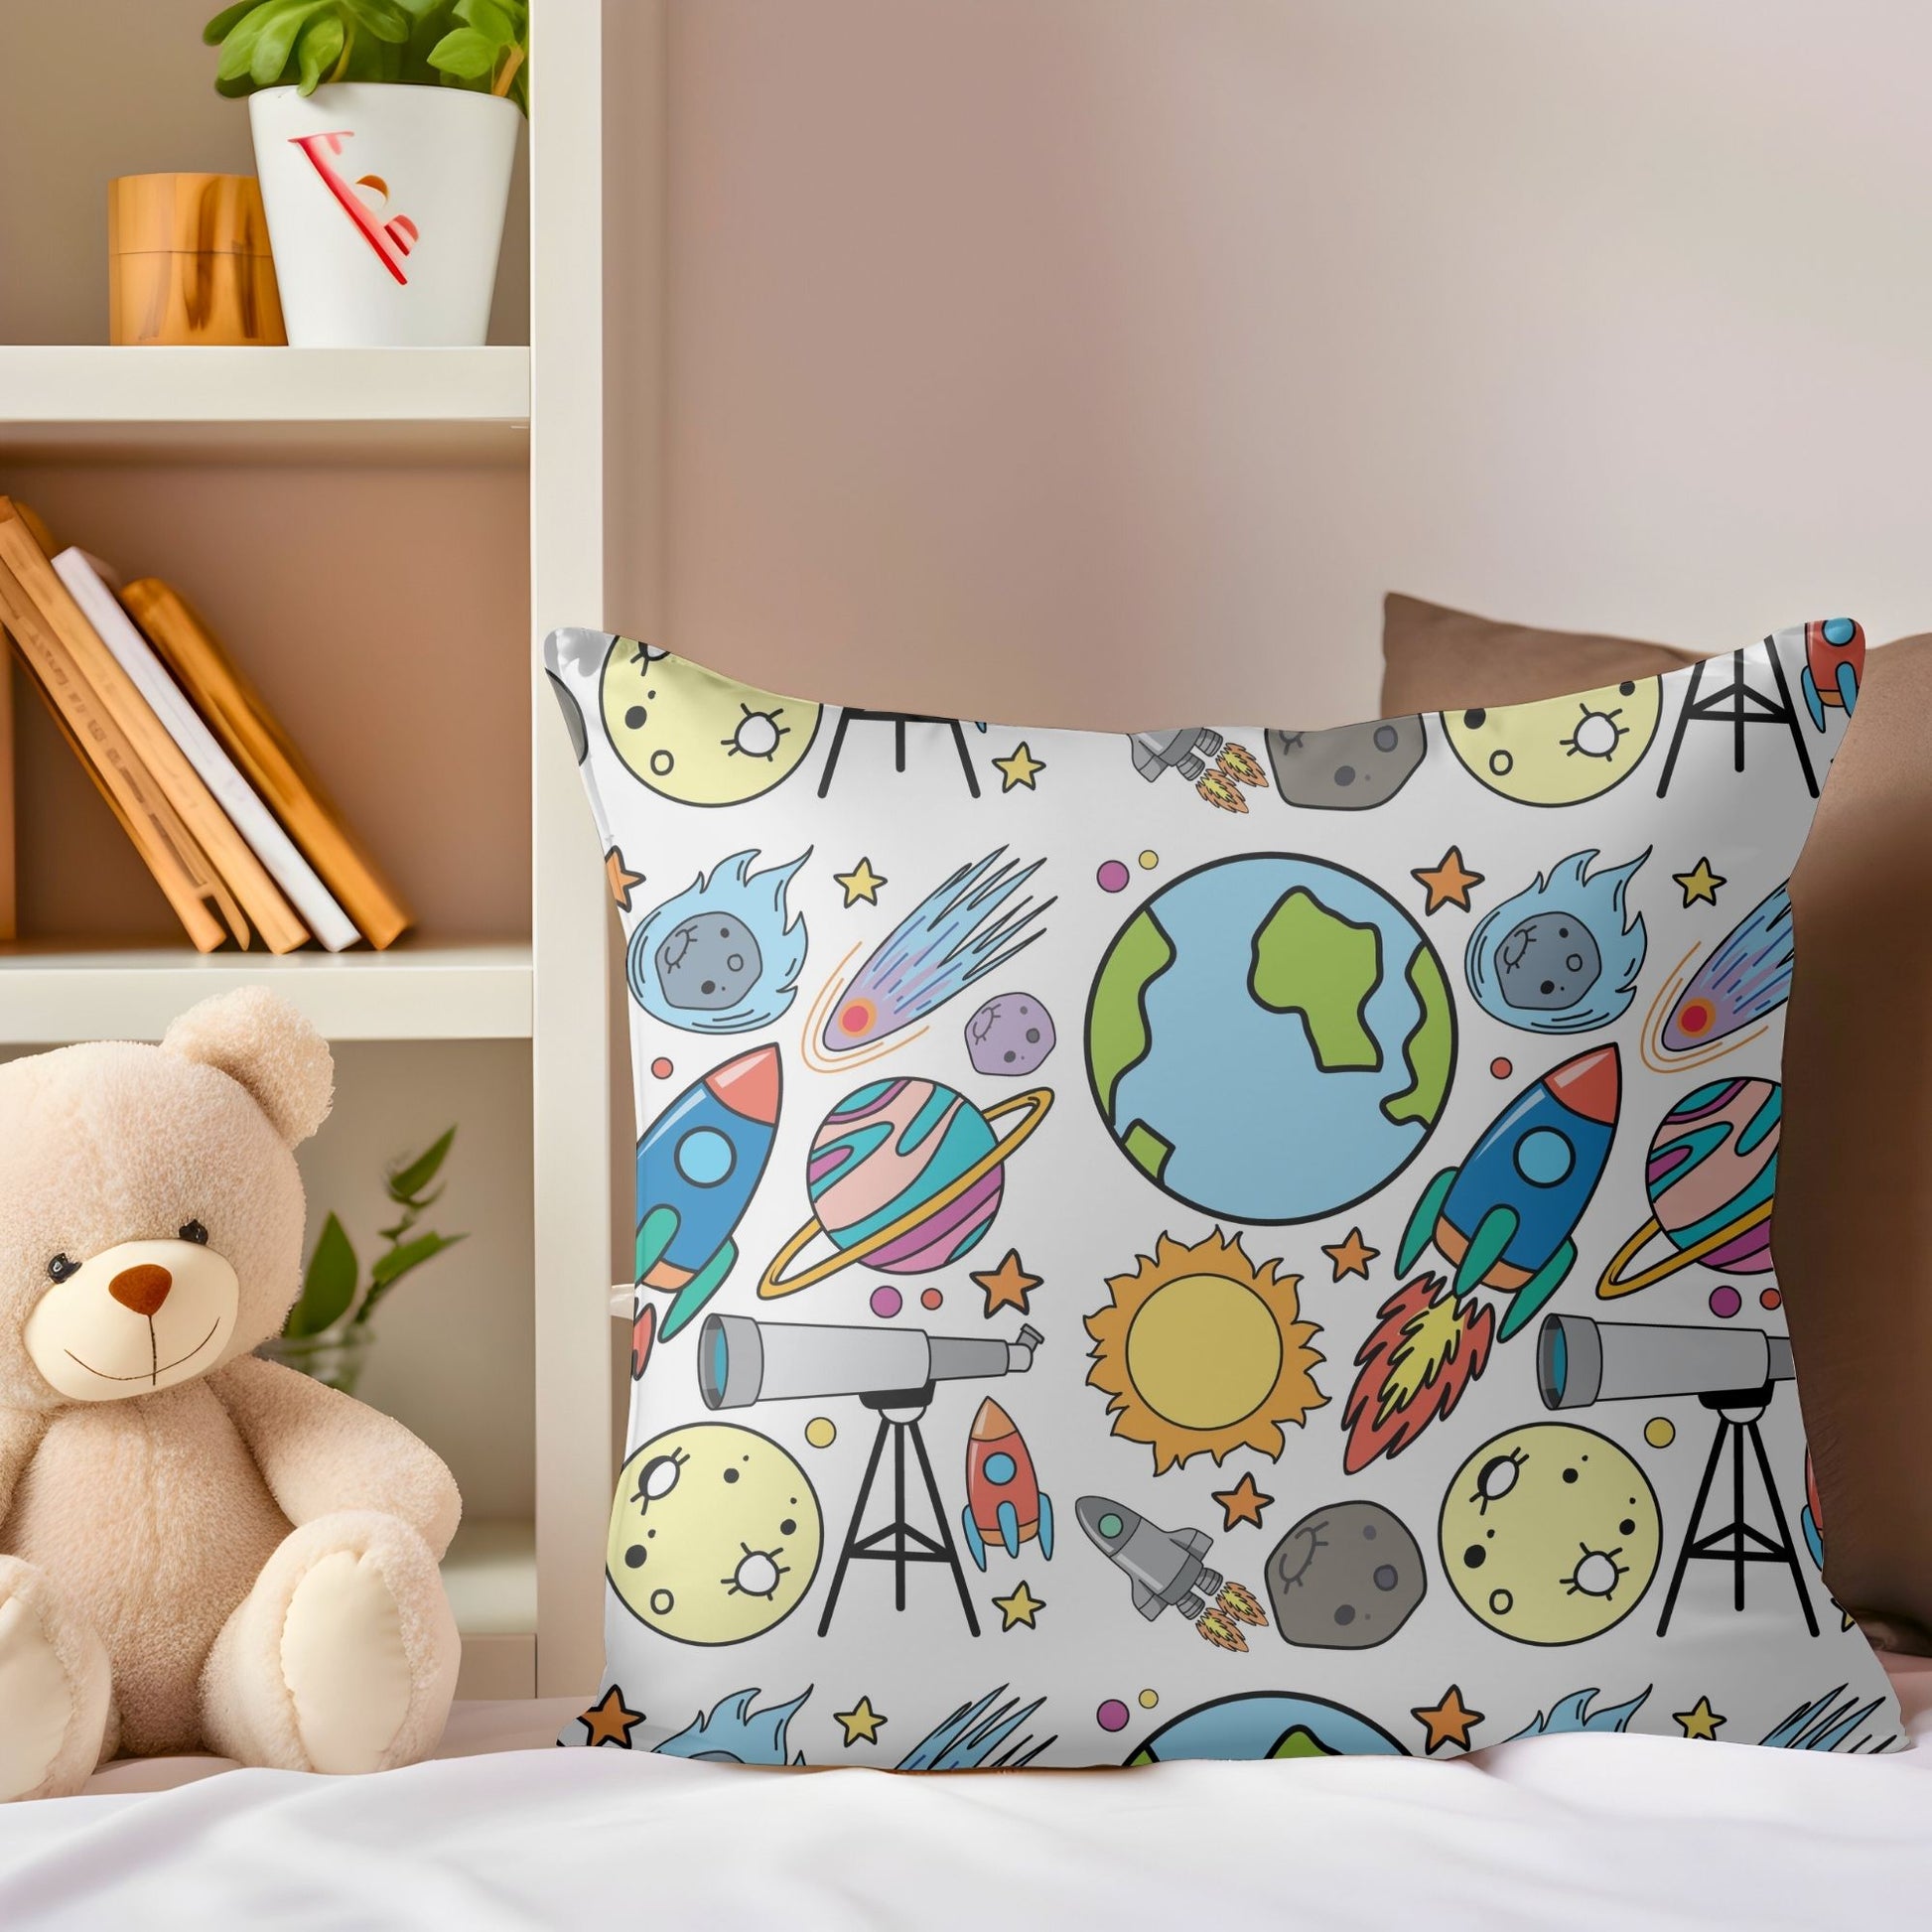 Soft pillow adorned with skyrockets pattern for nursery decor.